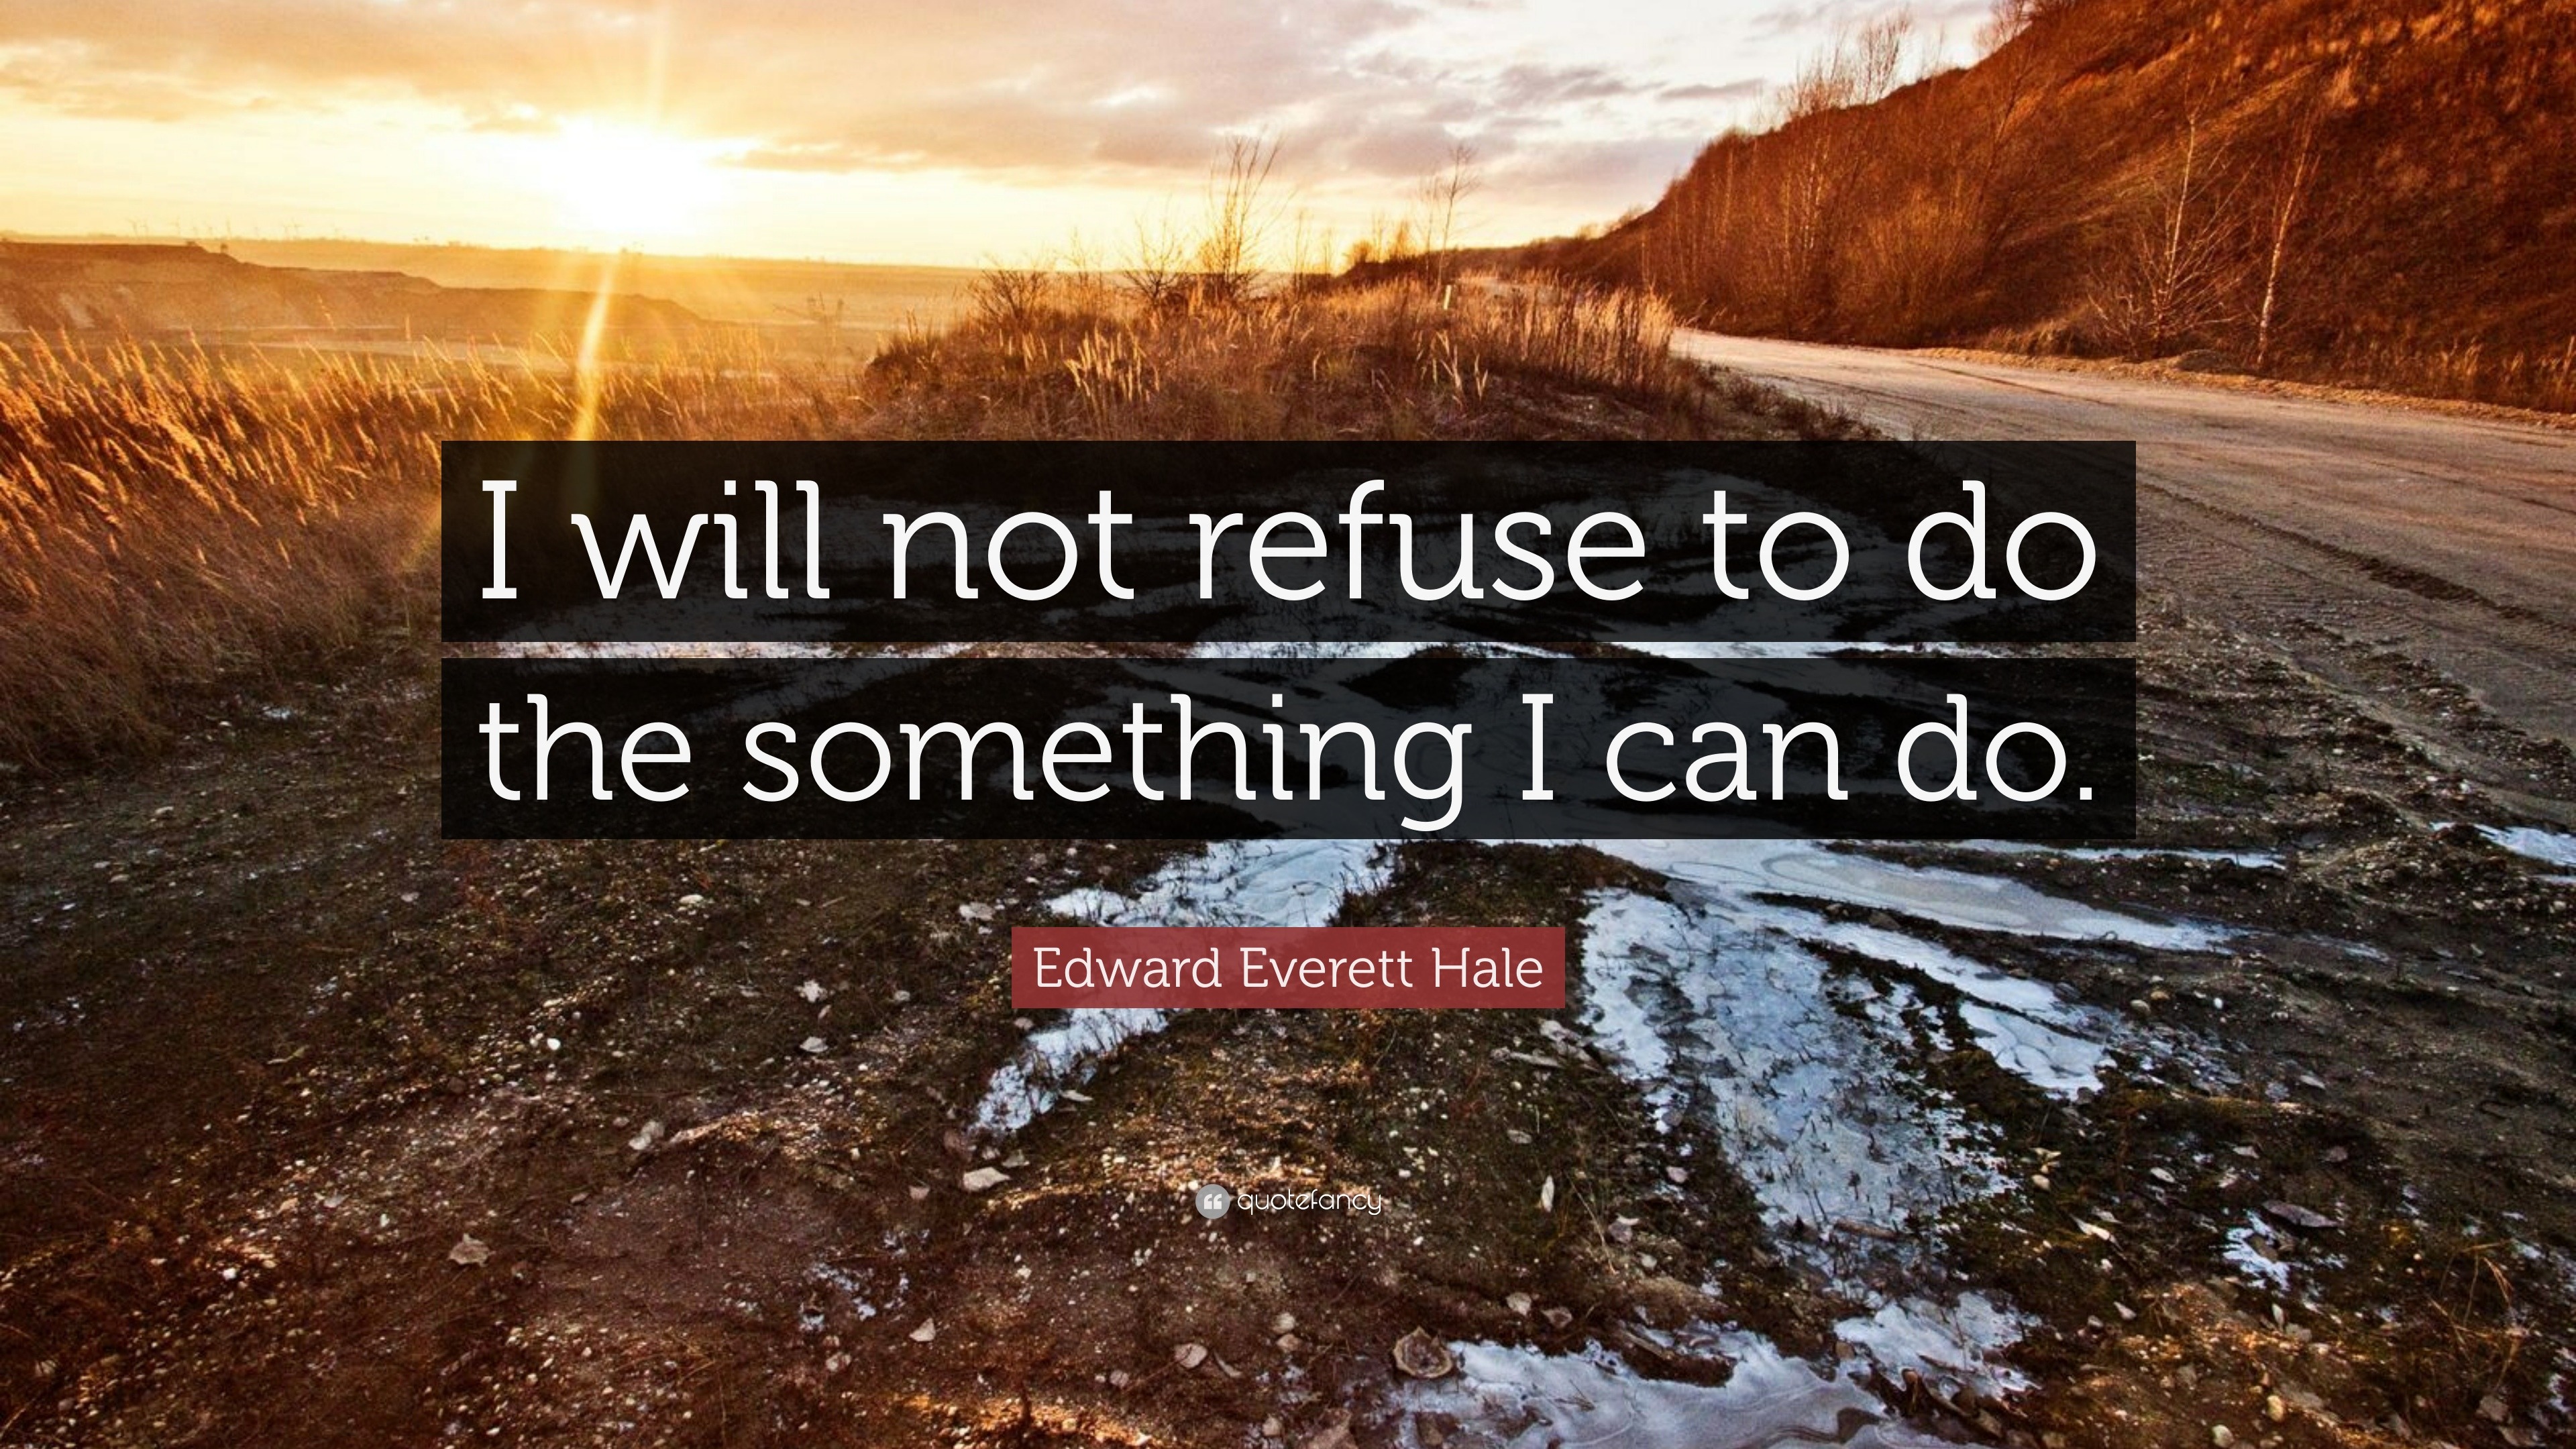 Edward Everett Hale Quote: “I will not refuse to do the something I can ...